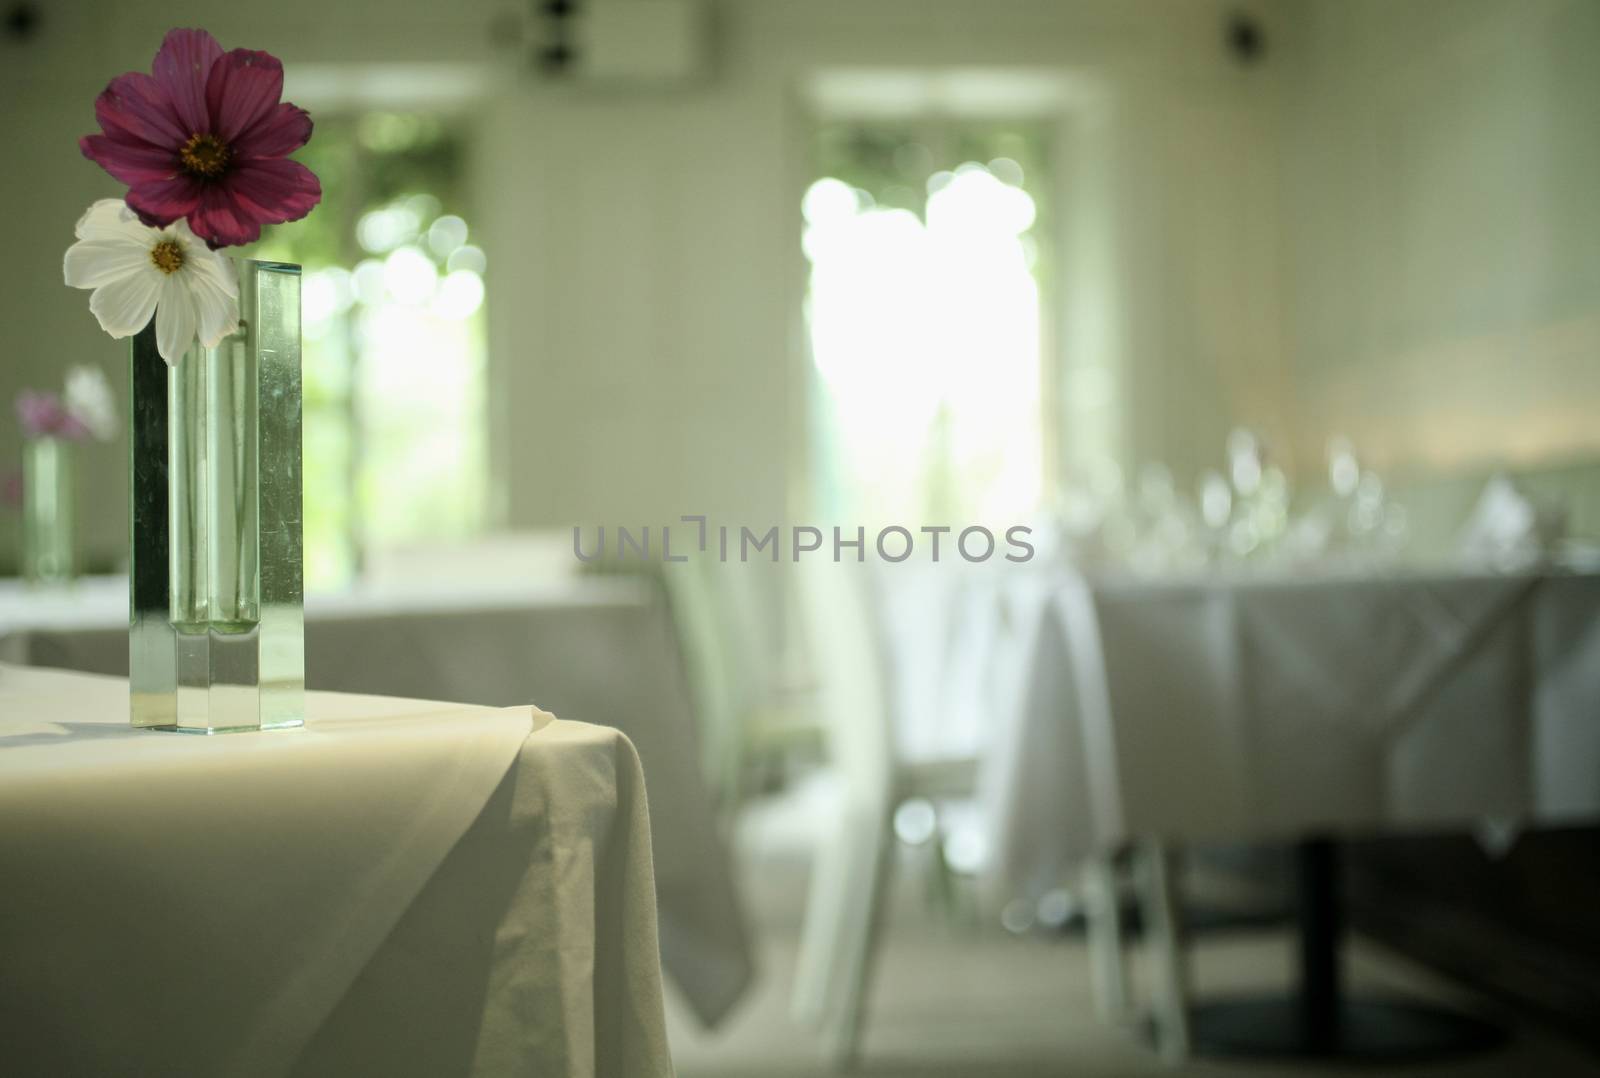 Color artistic digital rectangular horizontal photo of vase with red and white flowers on table in empty reception banquet marriage party room in Barcelona Spain. Shallow depth of with background out of focus.